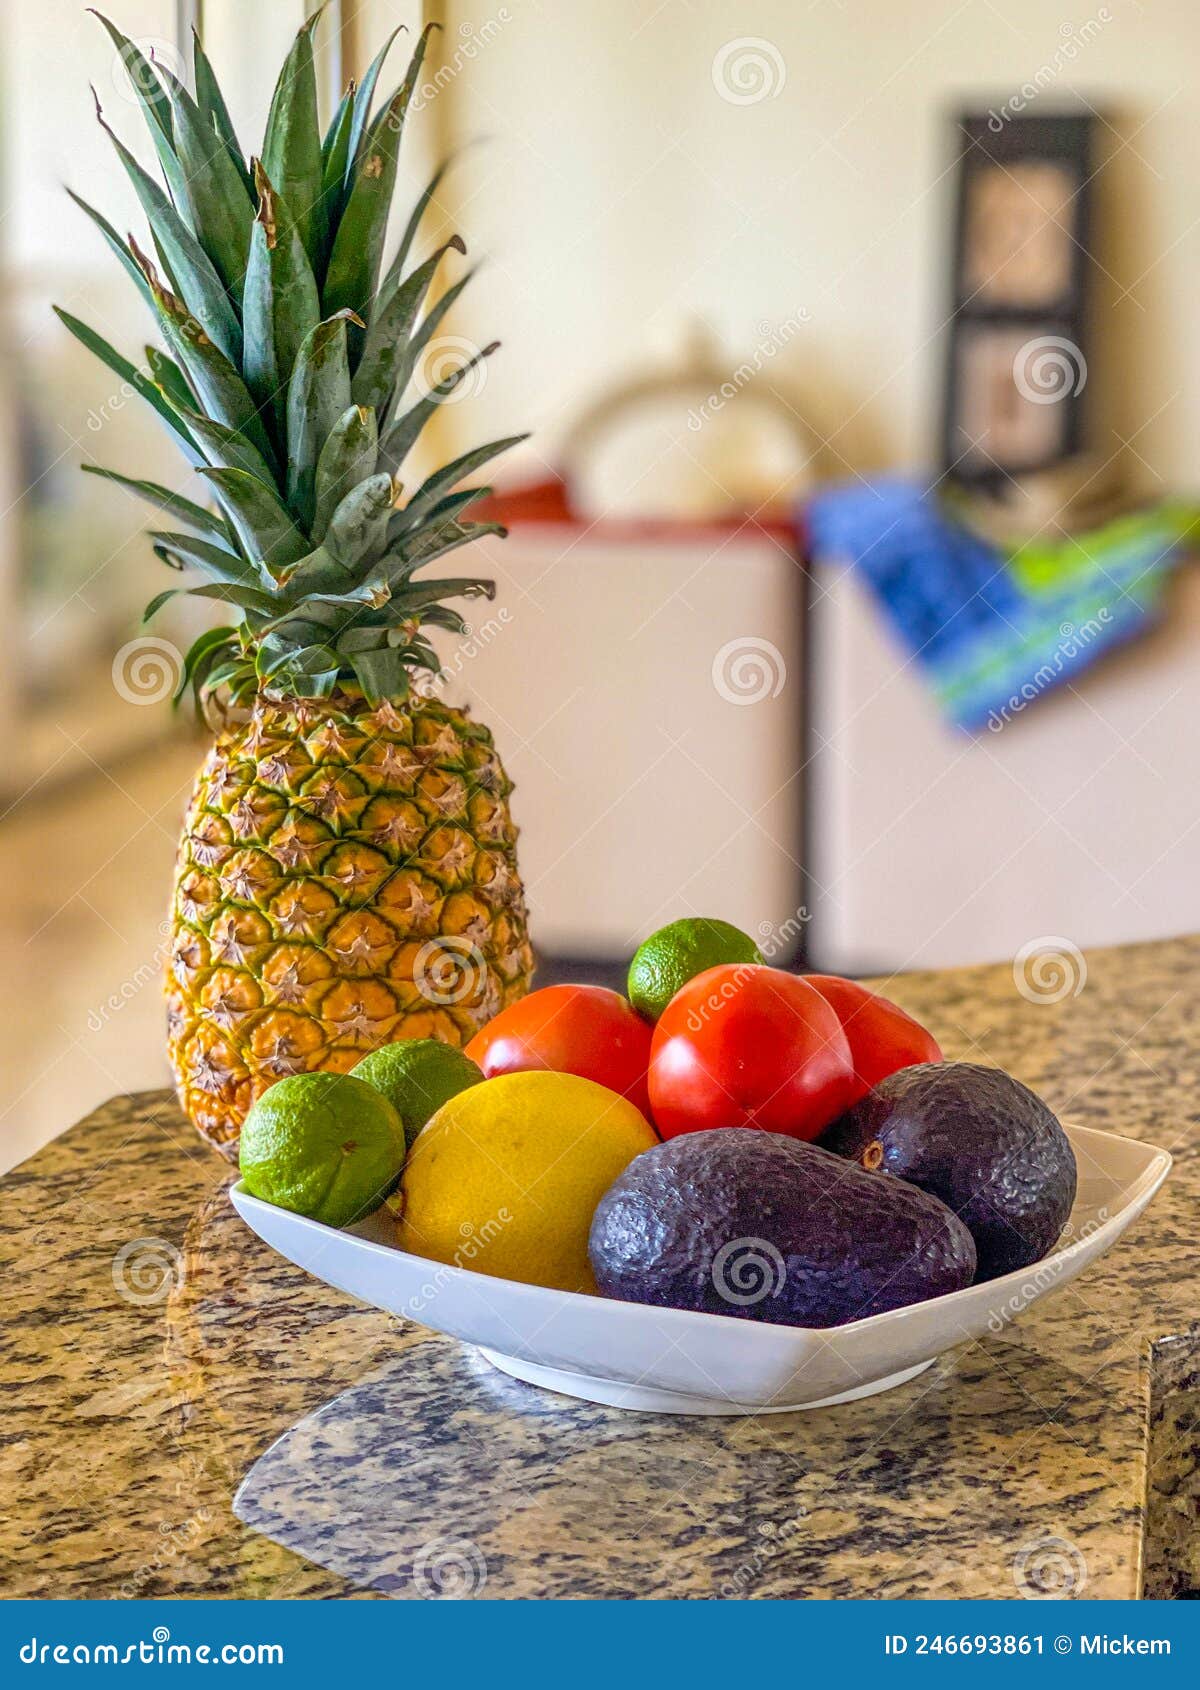 tropical fruits displayed in bowl